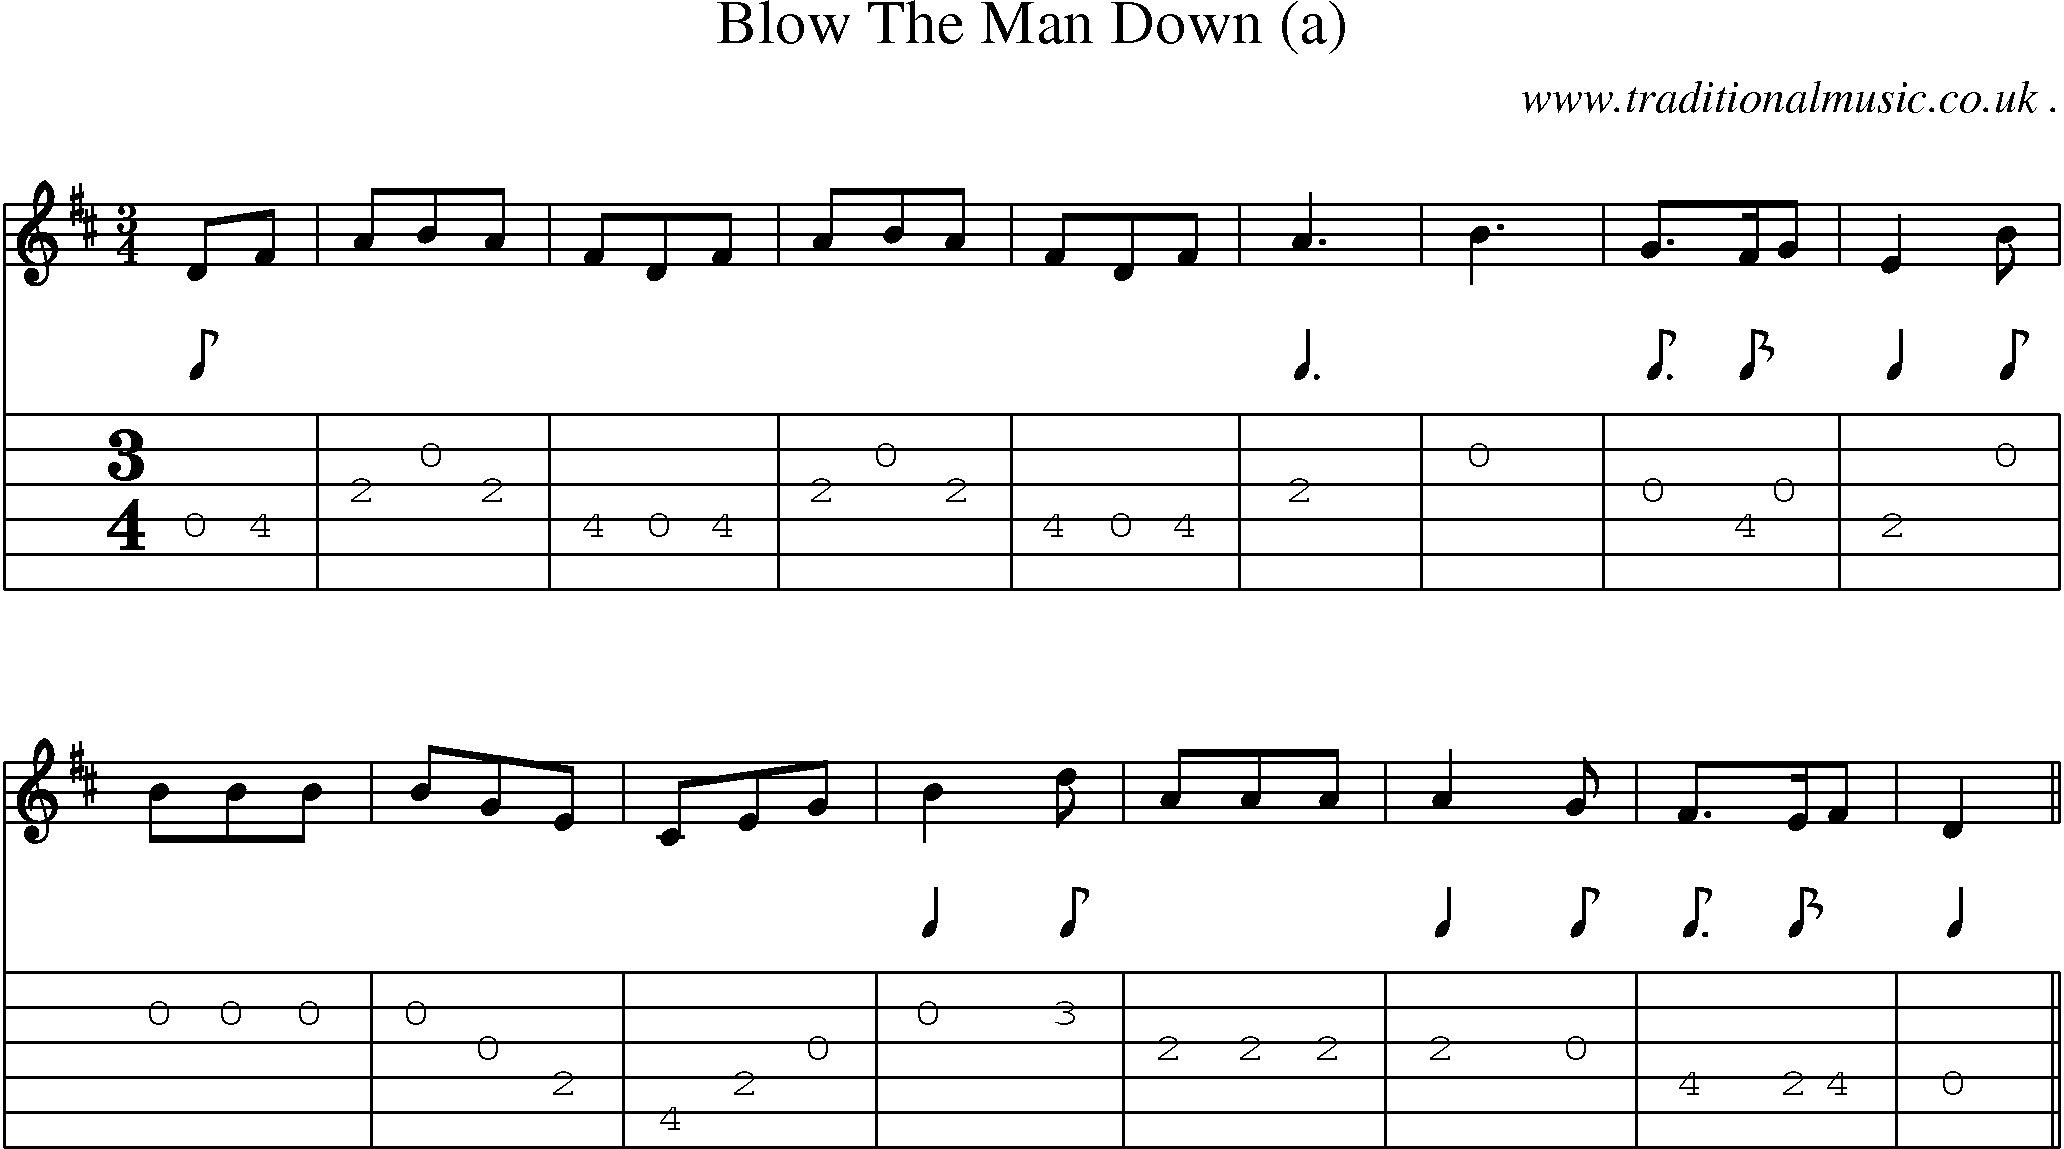 Sheet-Music and Guitar Tabs for Blow The Man Down (a)